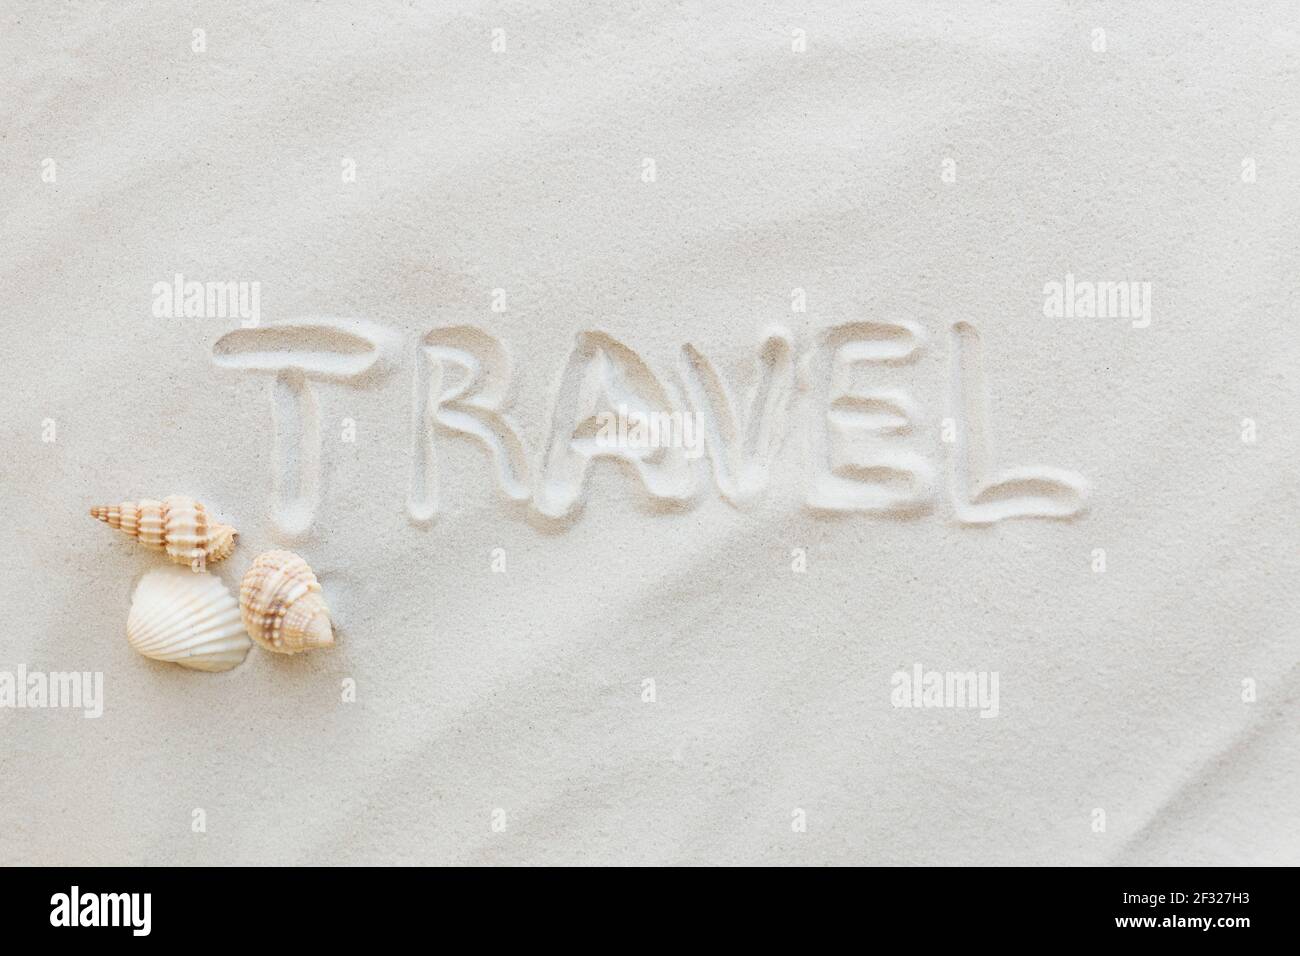 Travel, vacation concept. Sea shells on sand and blue background. Travelling, trip. Travel text. High quality photo Stock Photo